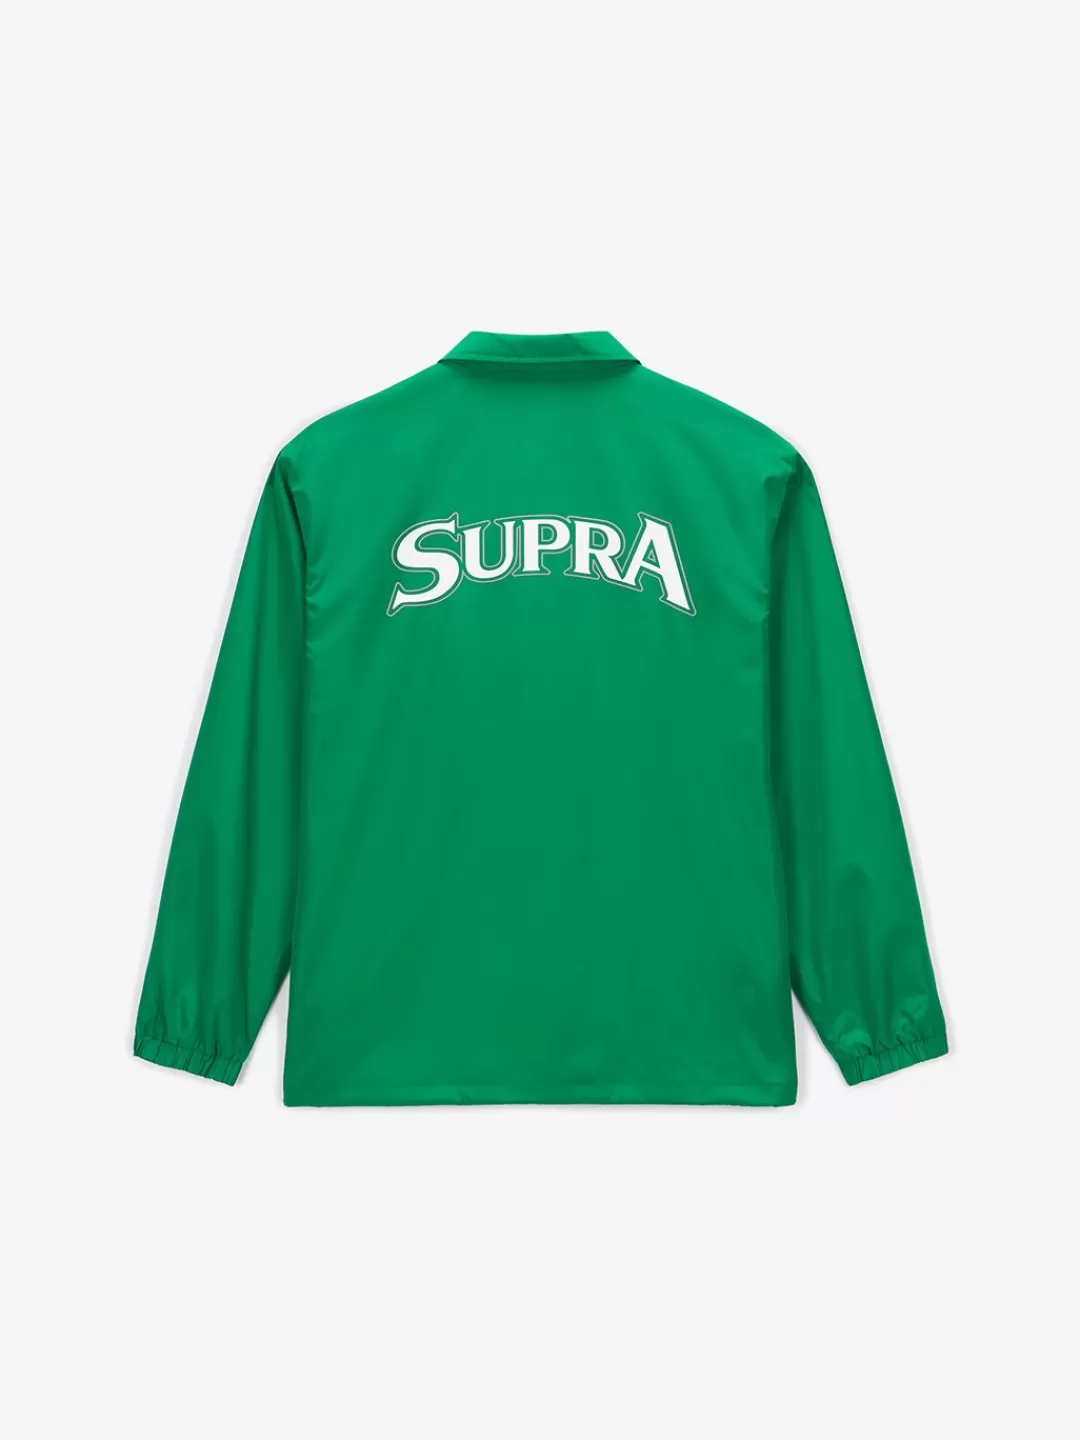 BAYC Back Graphic Woven Coach Jacket^Supra Clearance